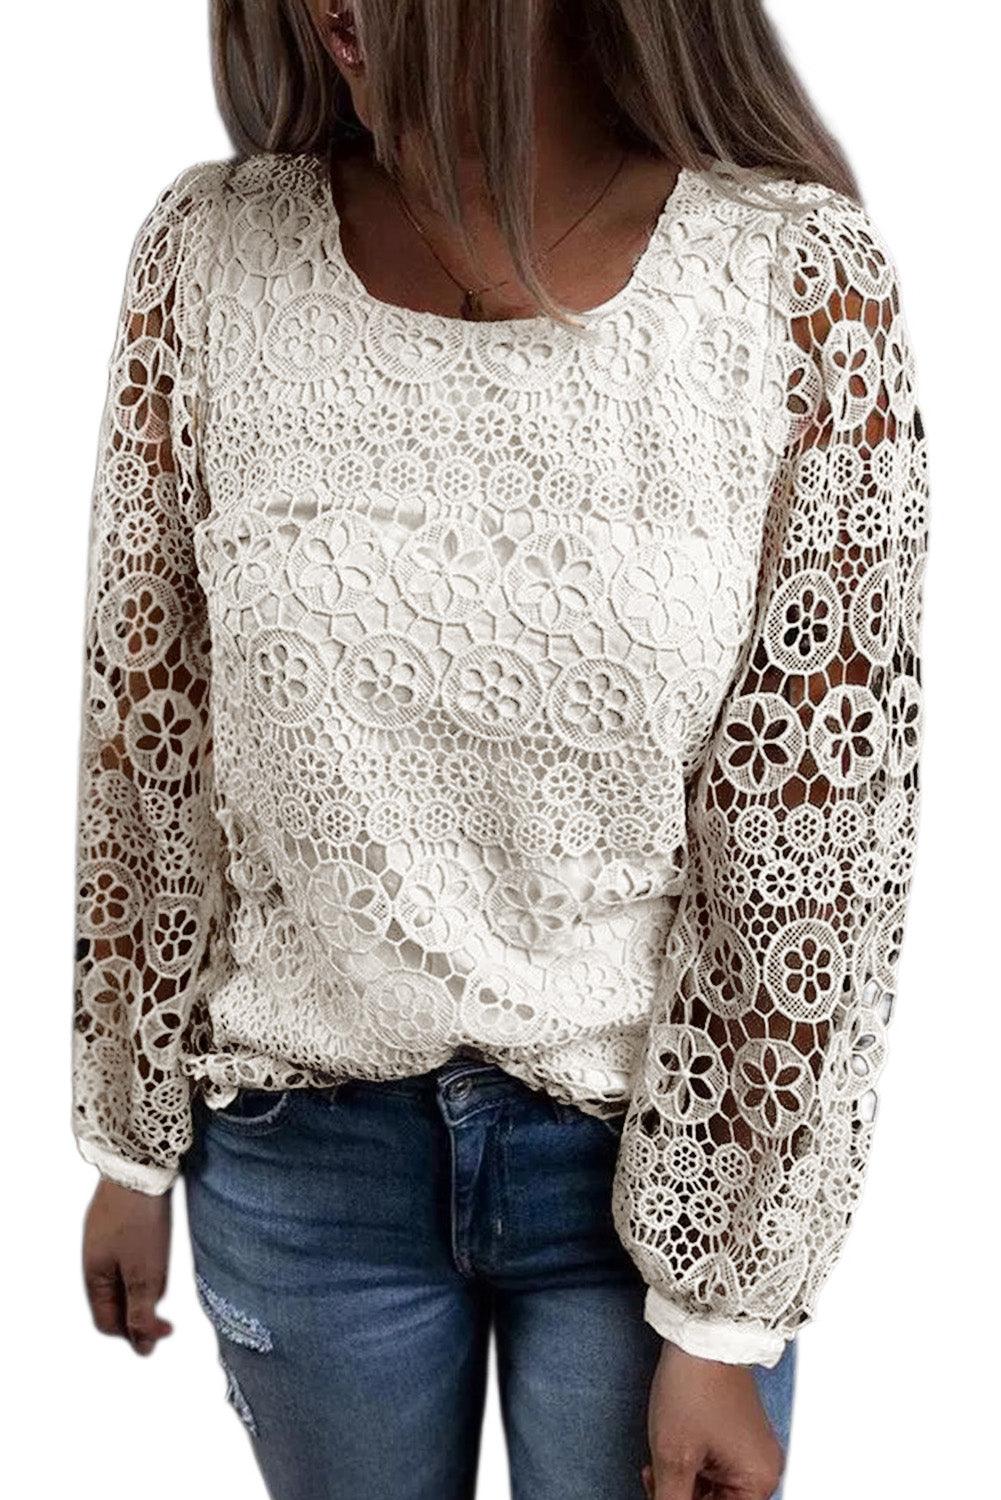 Beige Lace Contrast Hollow-out Long Sleeve Blouse - L & M Kee, LLC